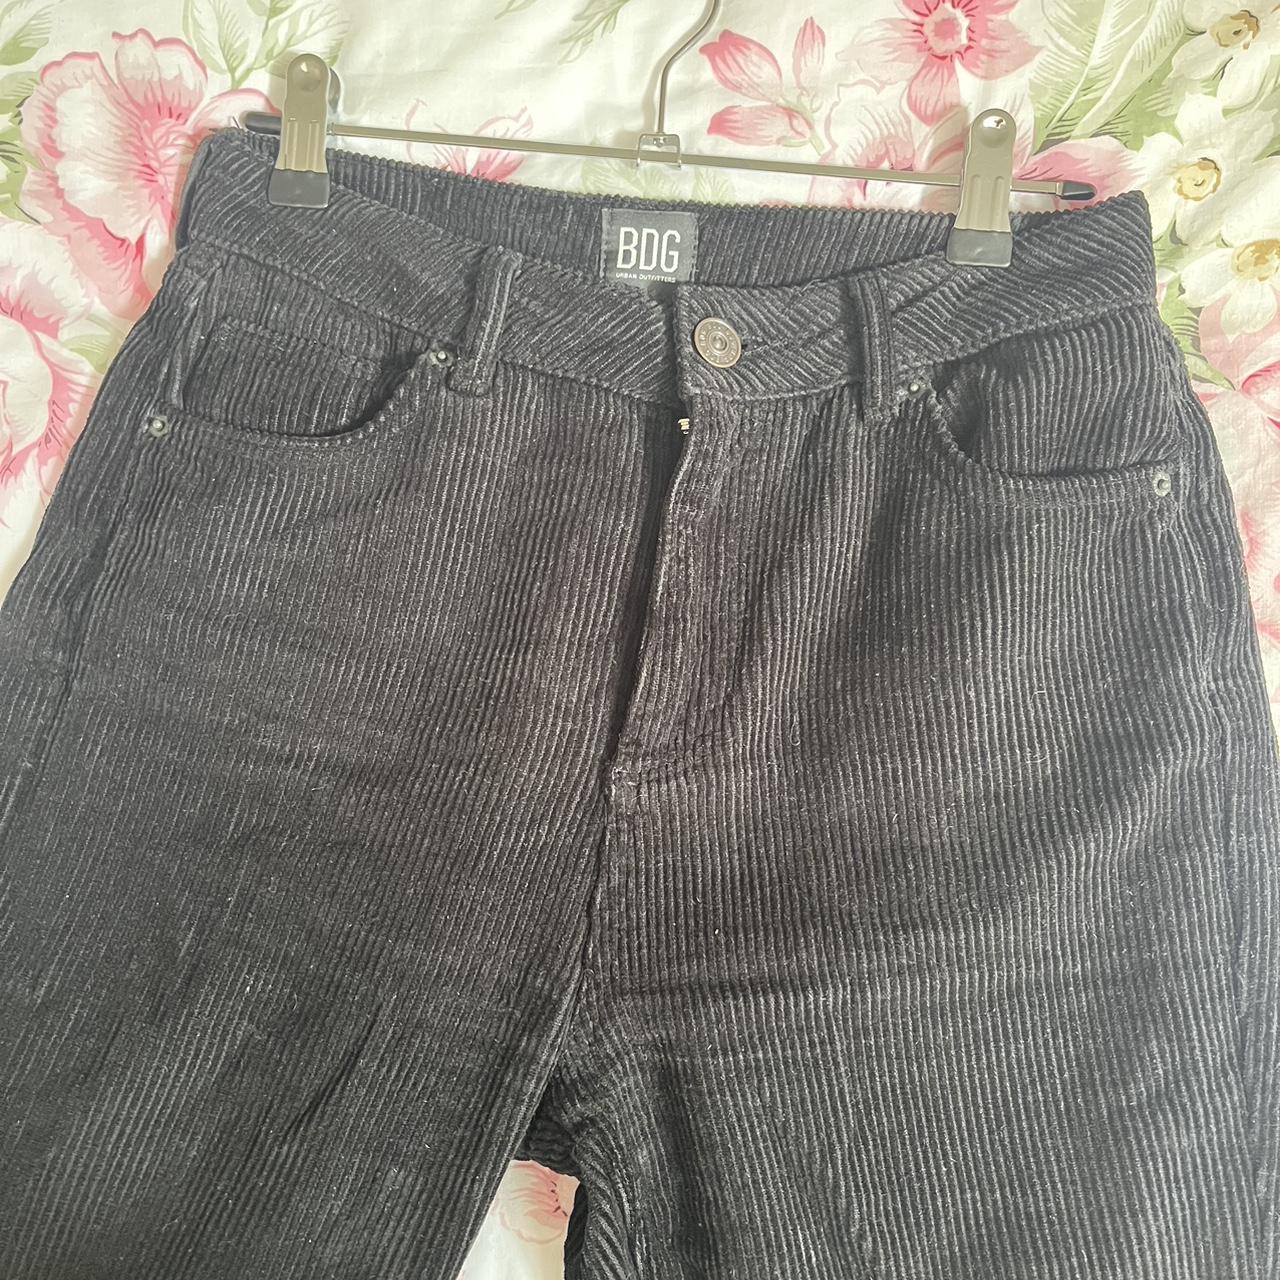 Urban outfitters corduroy BDG jeans Mom Jean style... - Depop